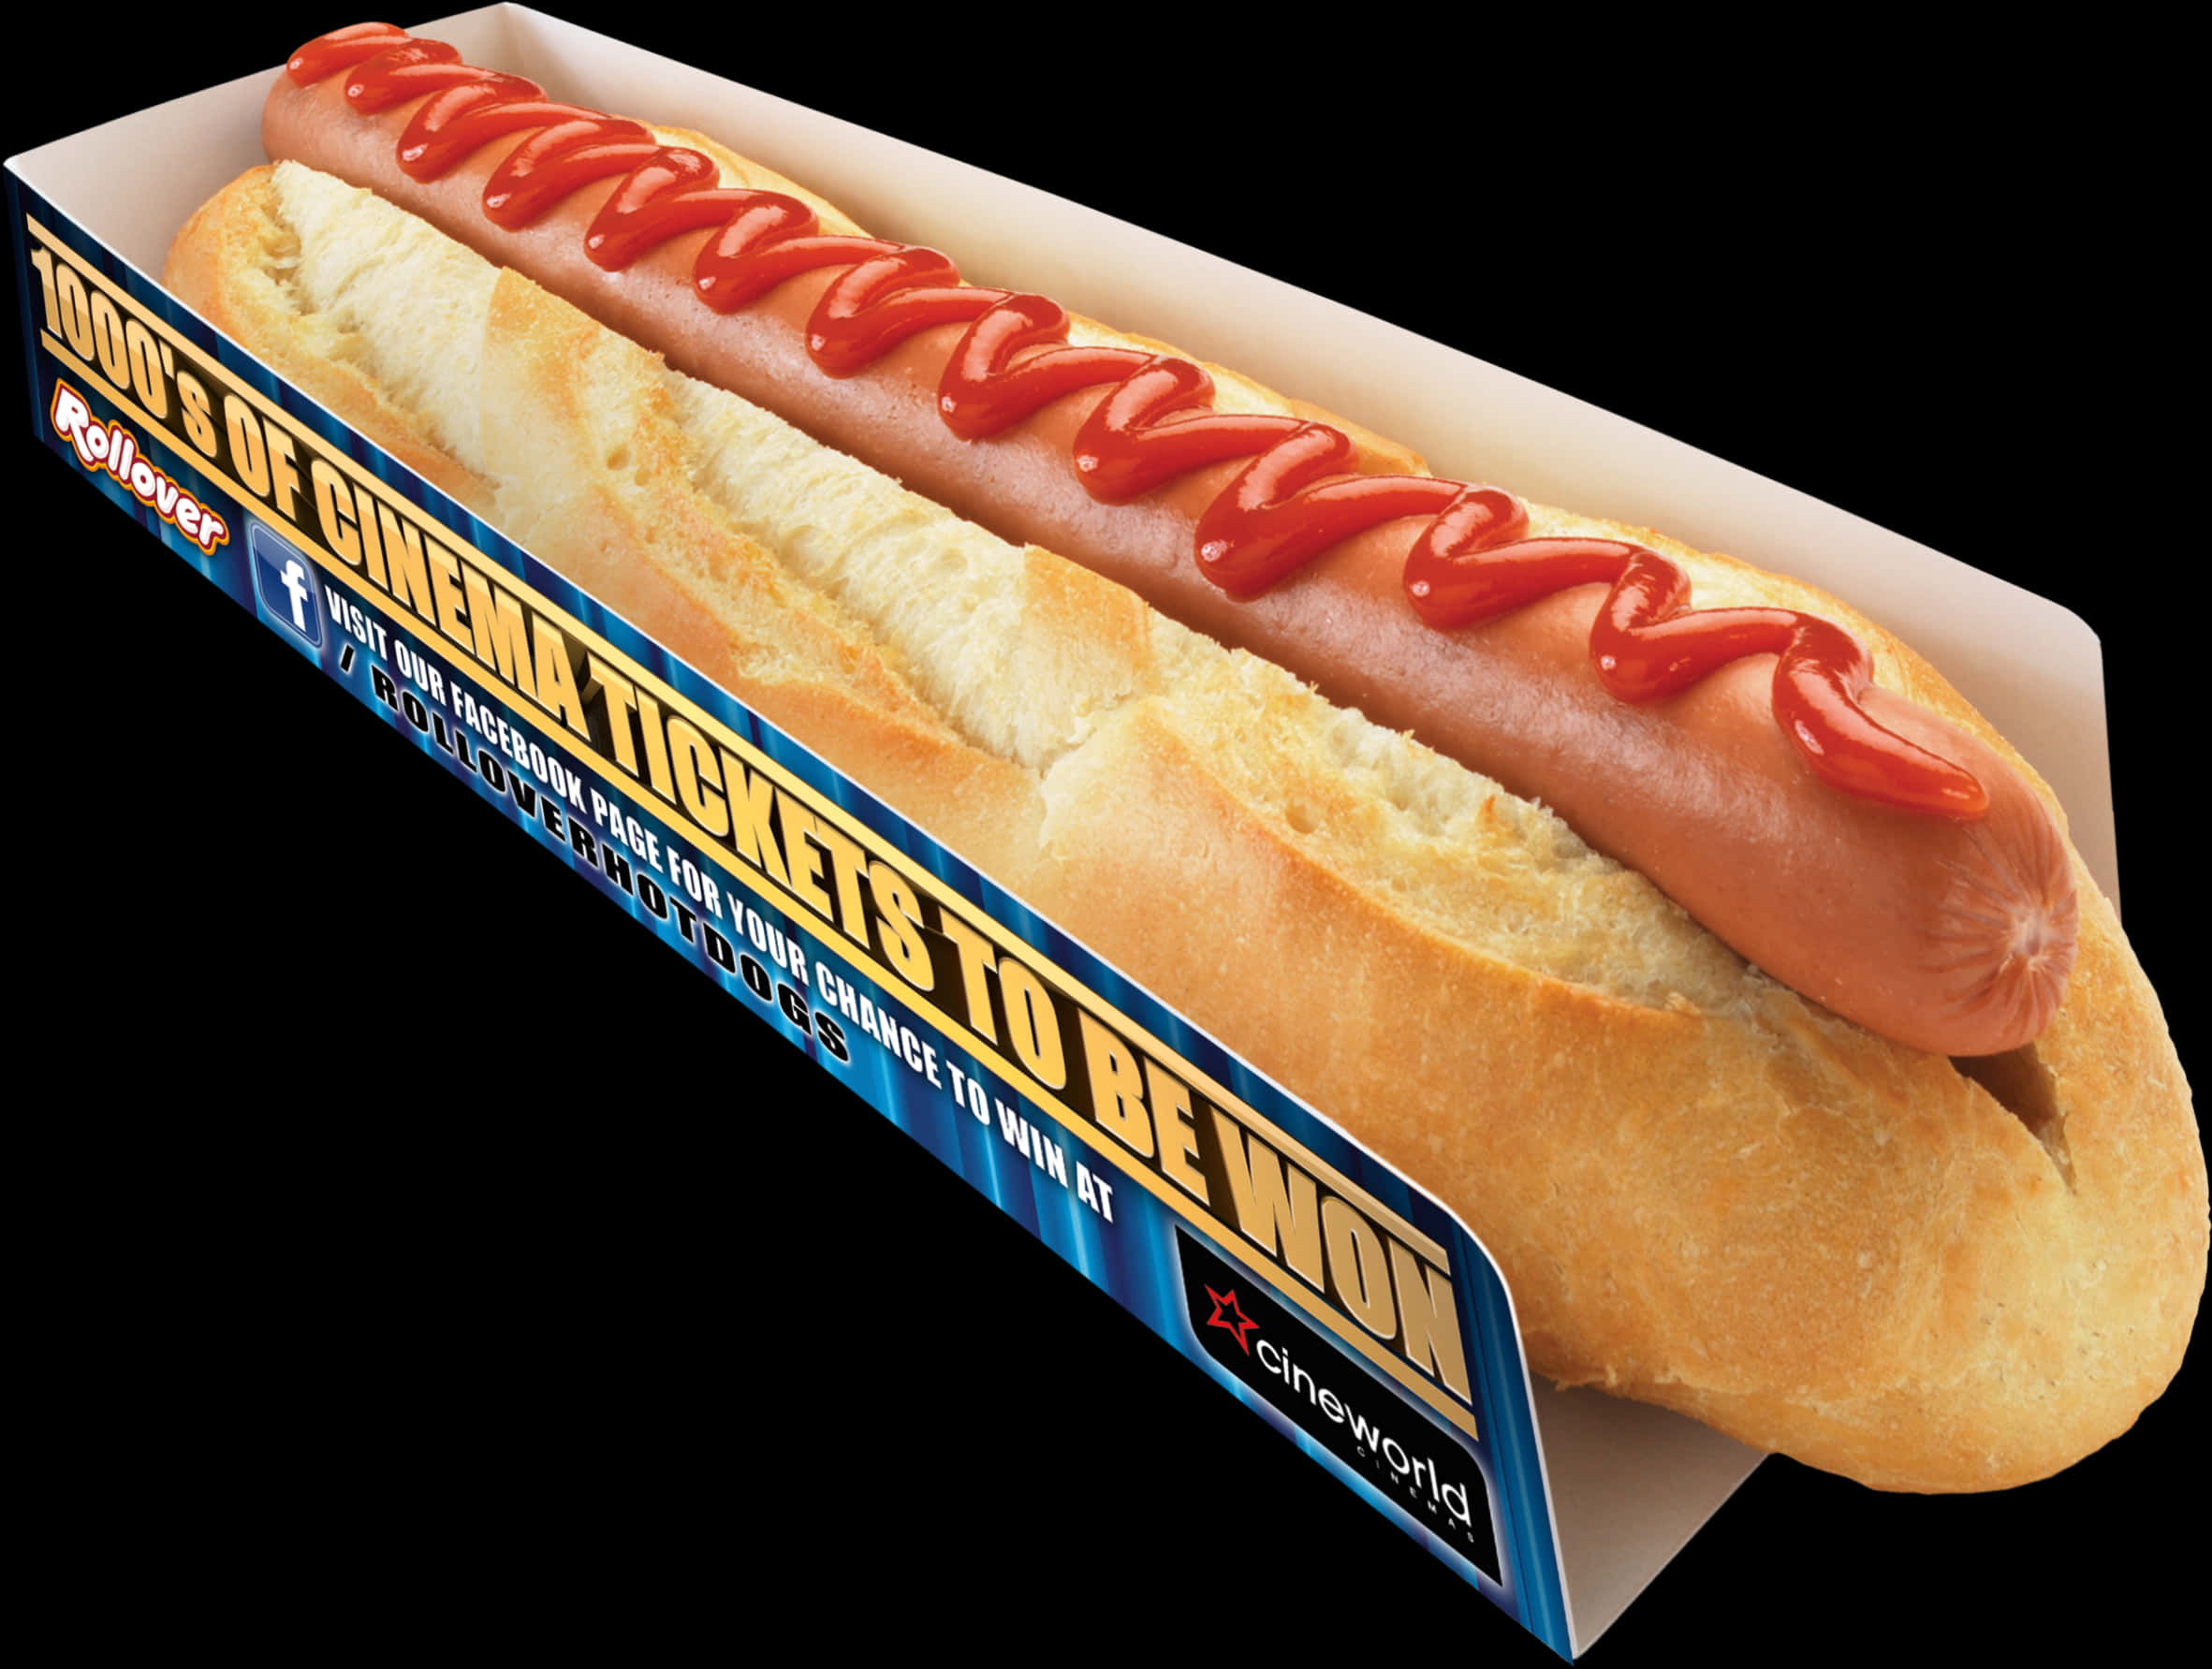 A Hot Dog With Ketchup On It